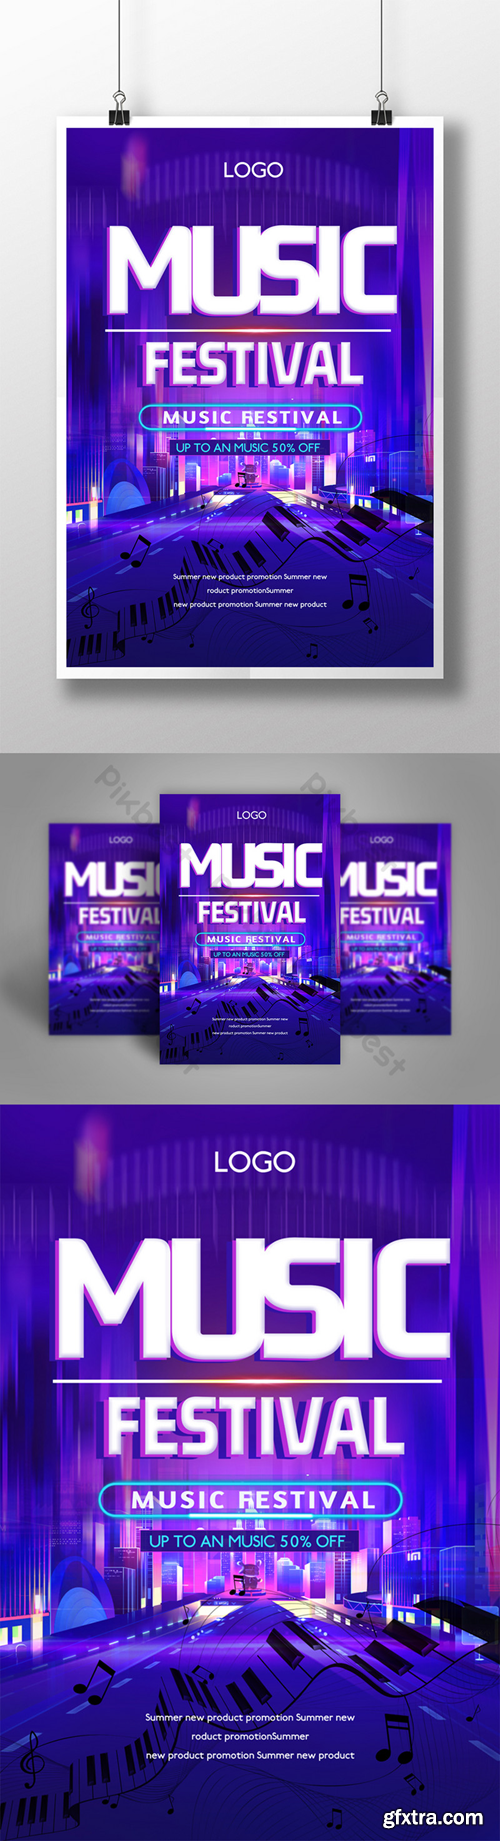 Music Festival Notes Neon Light Effect Fantasy Poster Template PSD